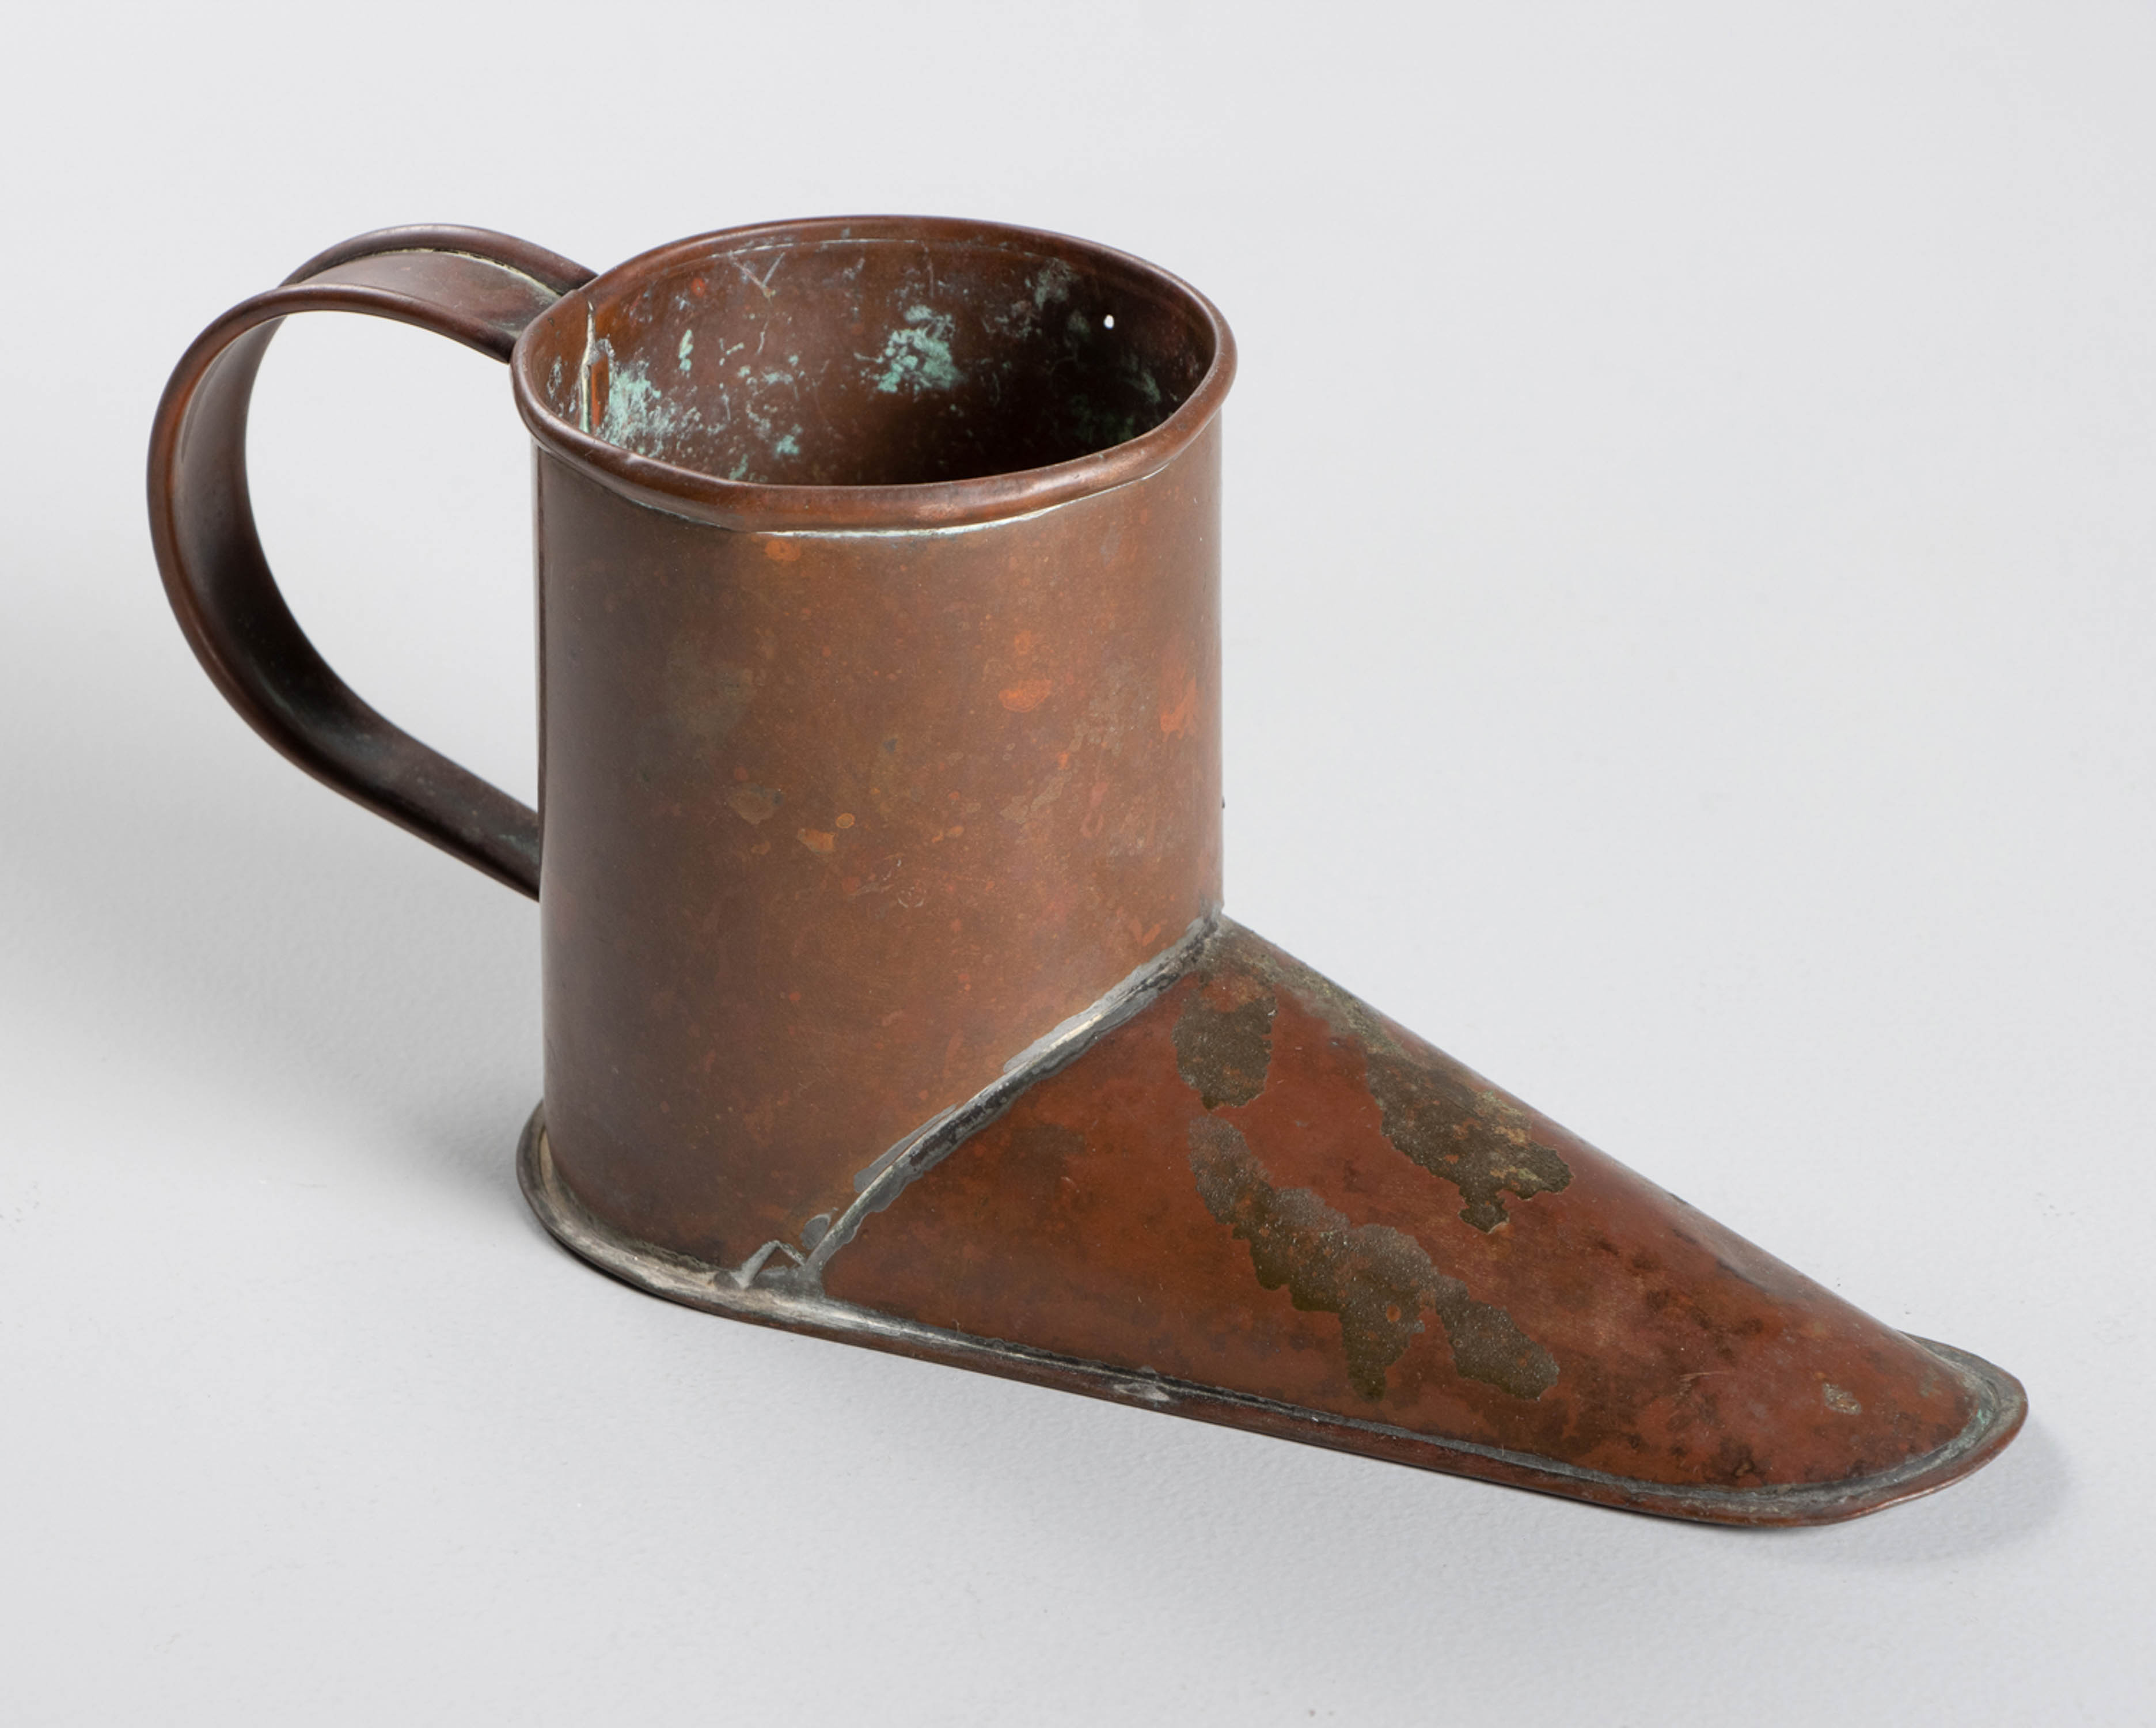 AN ENGLISH COPPER ALE WARMER, LATE 18TH/EARLY 19TH CENTURY